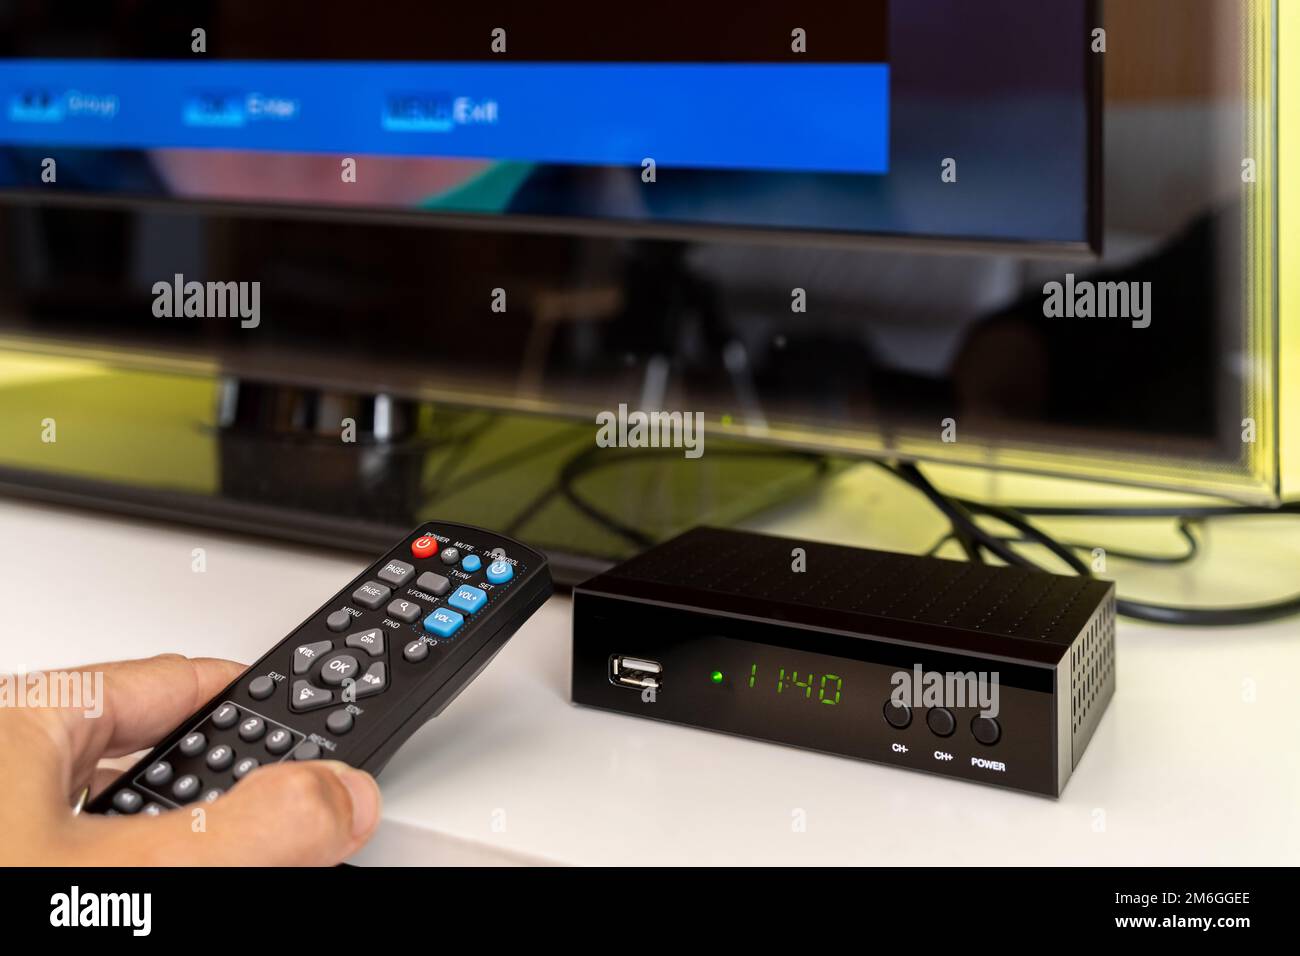 Digital decoder with remote control and television monitor. Stock Photo